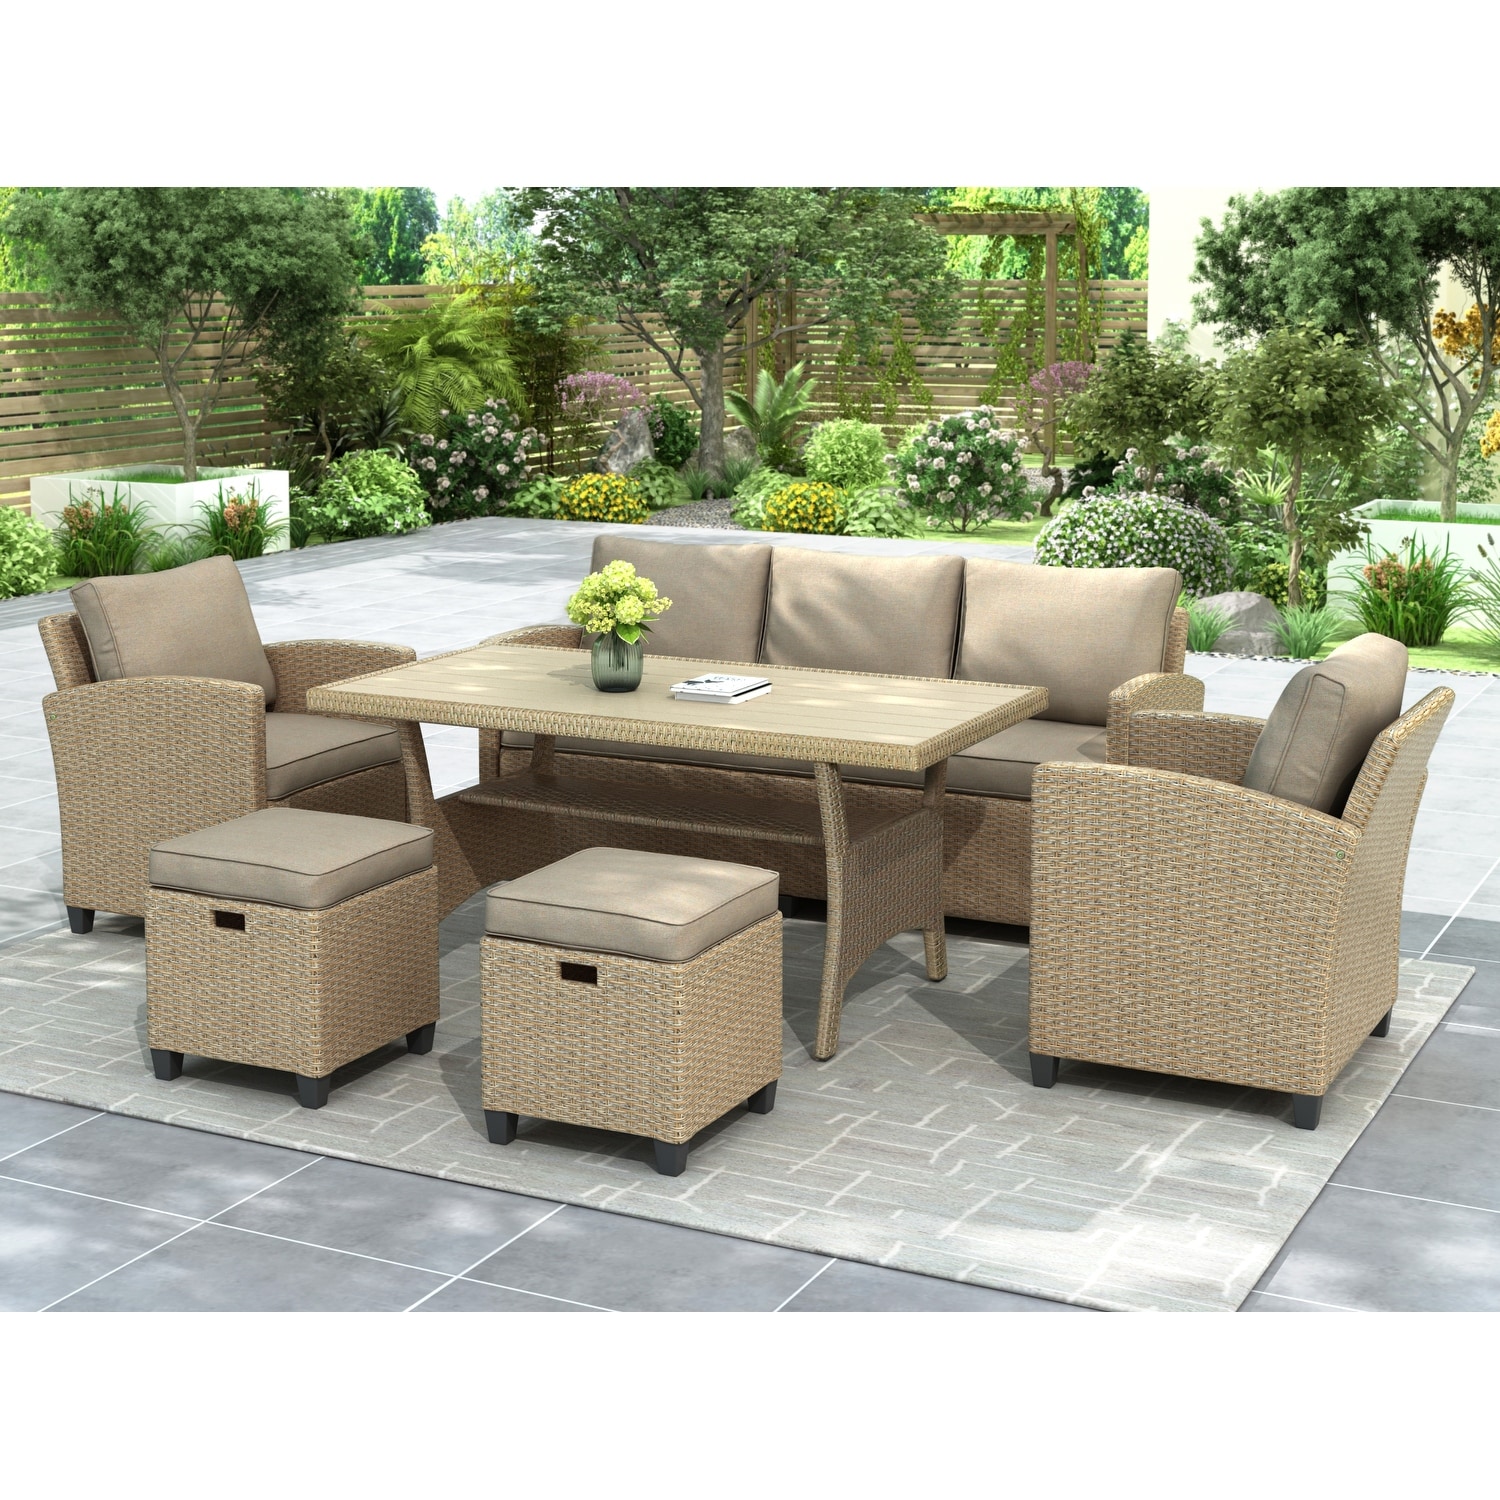 6-piece Garden Patio Furniture Rattan Wicker Set Patio Garden Backyard Thick Sponge Back Pad And Sofa Chair Stools And Table